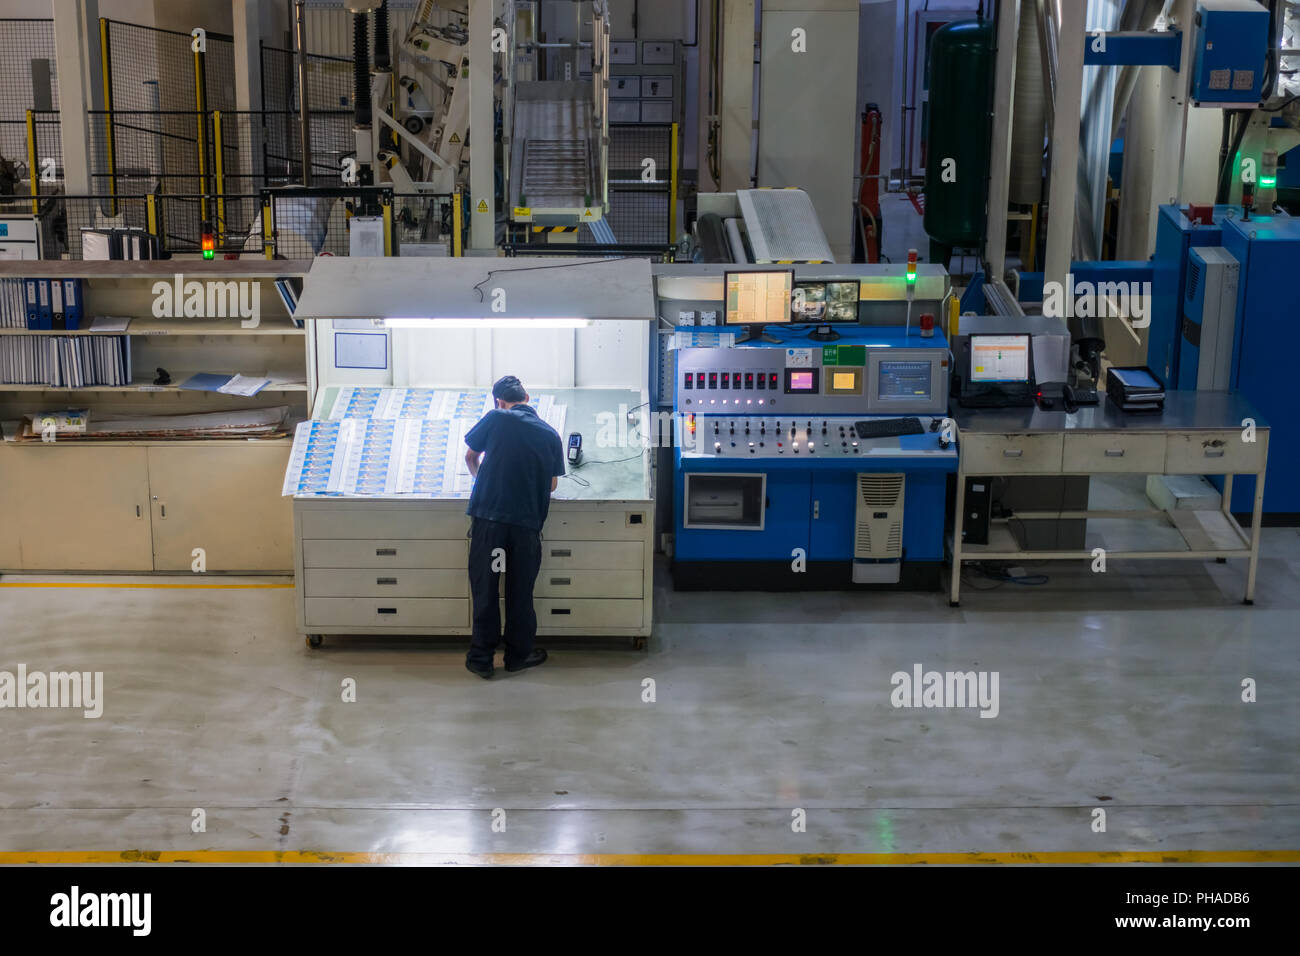 Employee Working at Printing Equipment Factory Industrial Setting Stock Photo